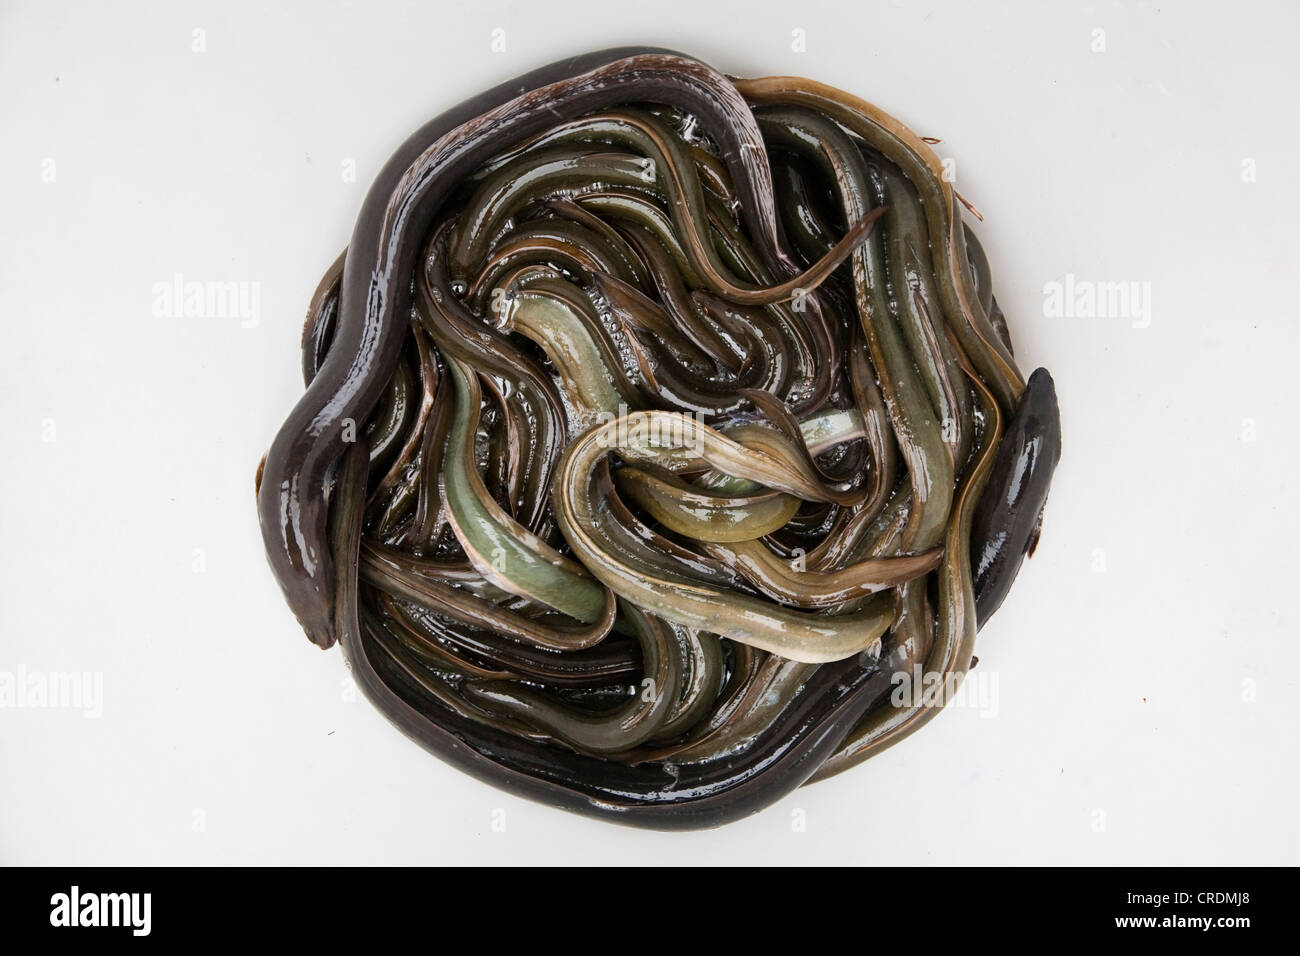 Eels caught in the Upper Elbe river near Winsen Luhe, Lower Saxony, Germany, Europe Stock Photo